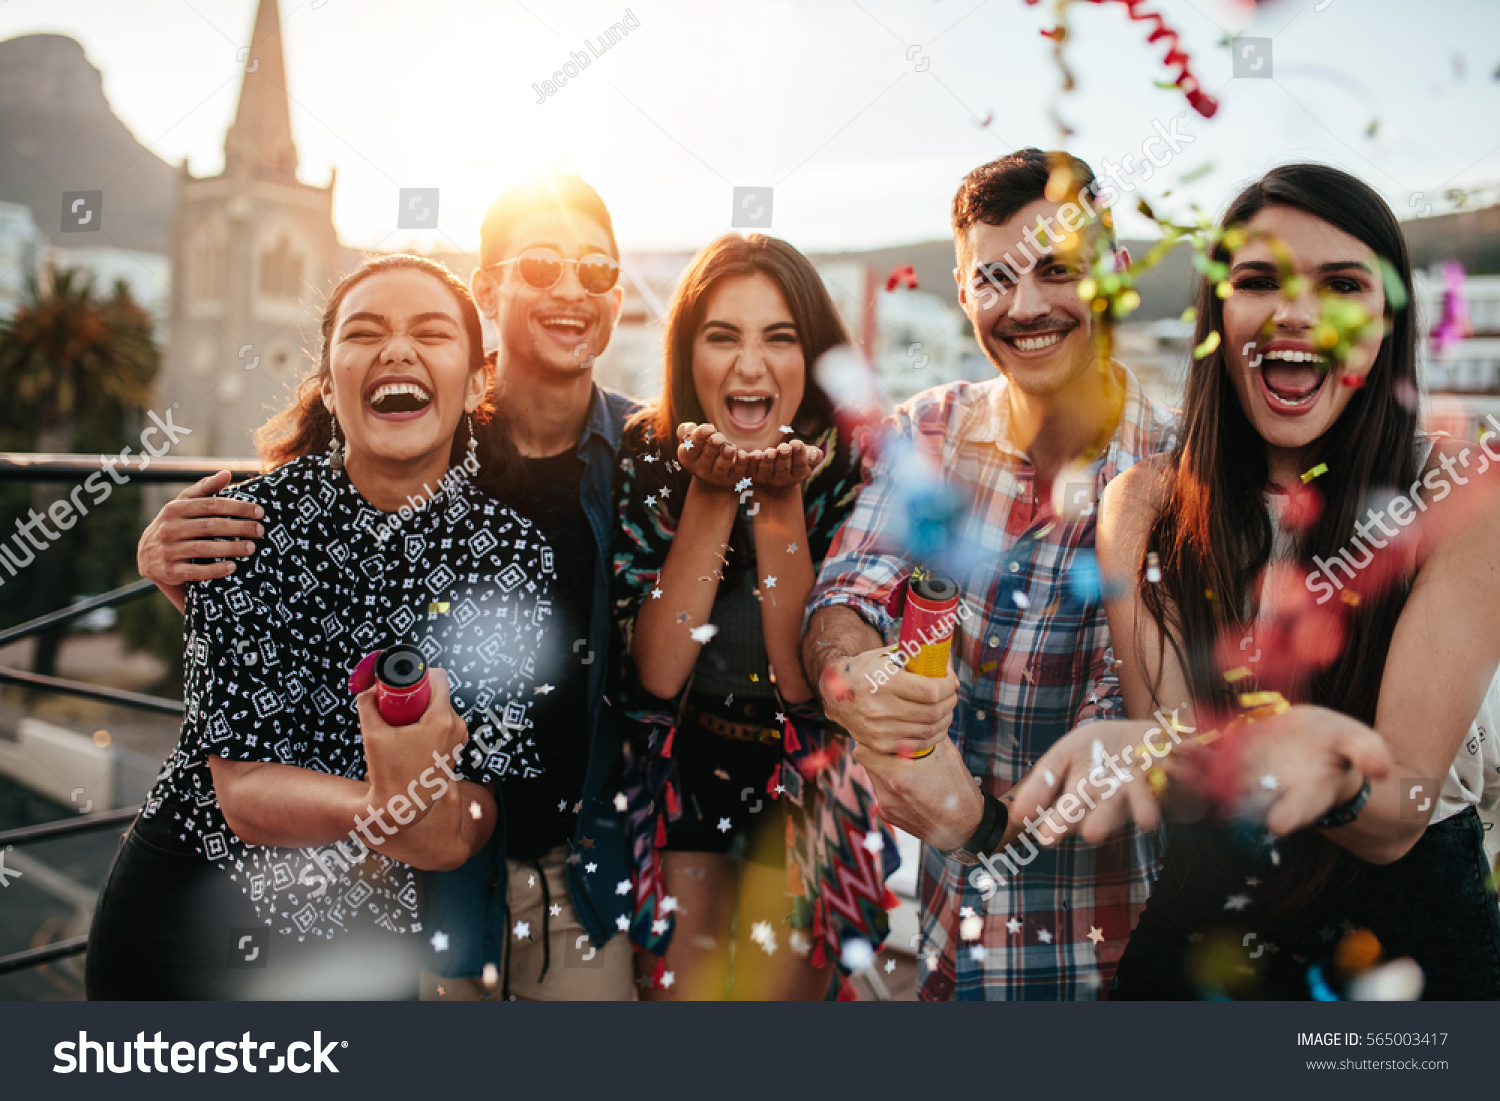 stock-photo-group-of-friends-enjoying-party-and-throwing-confetti-friends-having-fun-at-rooftop-party-565003417.jpg